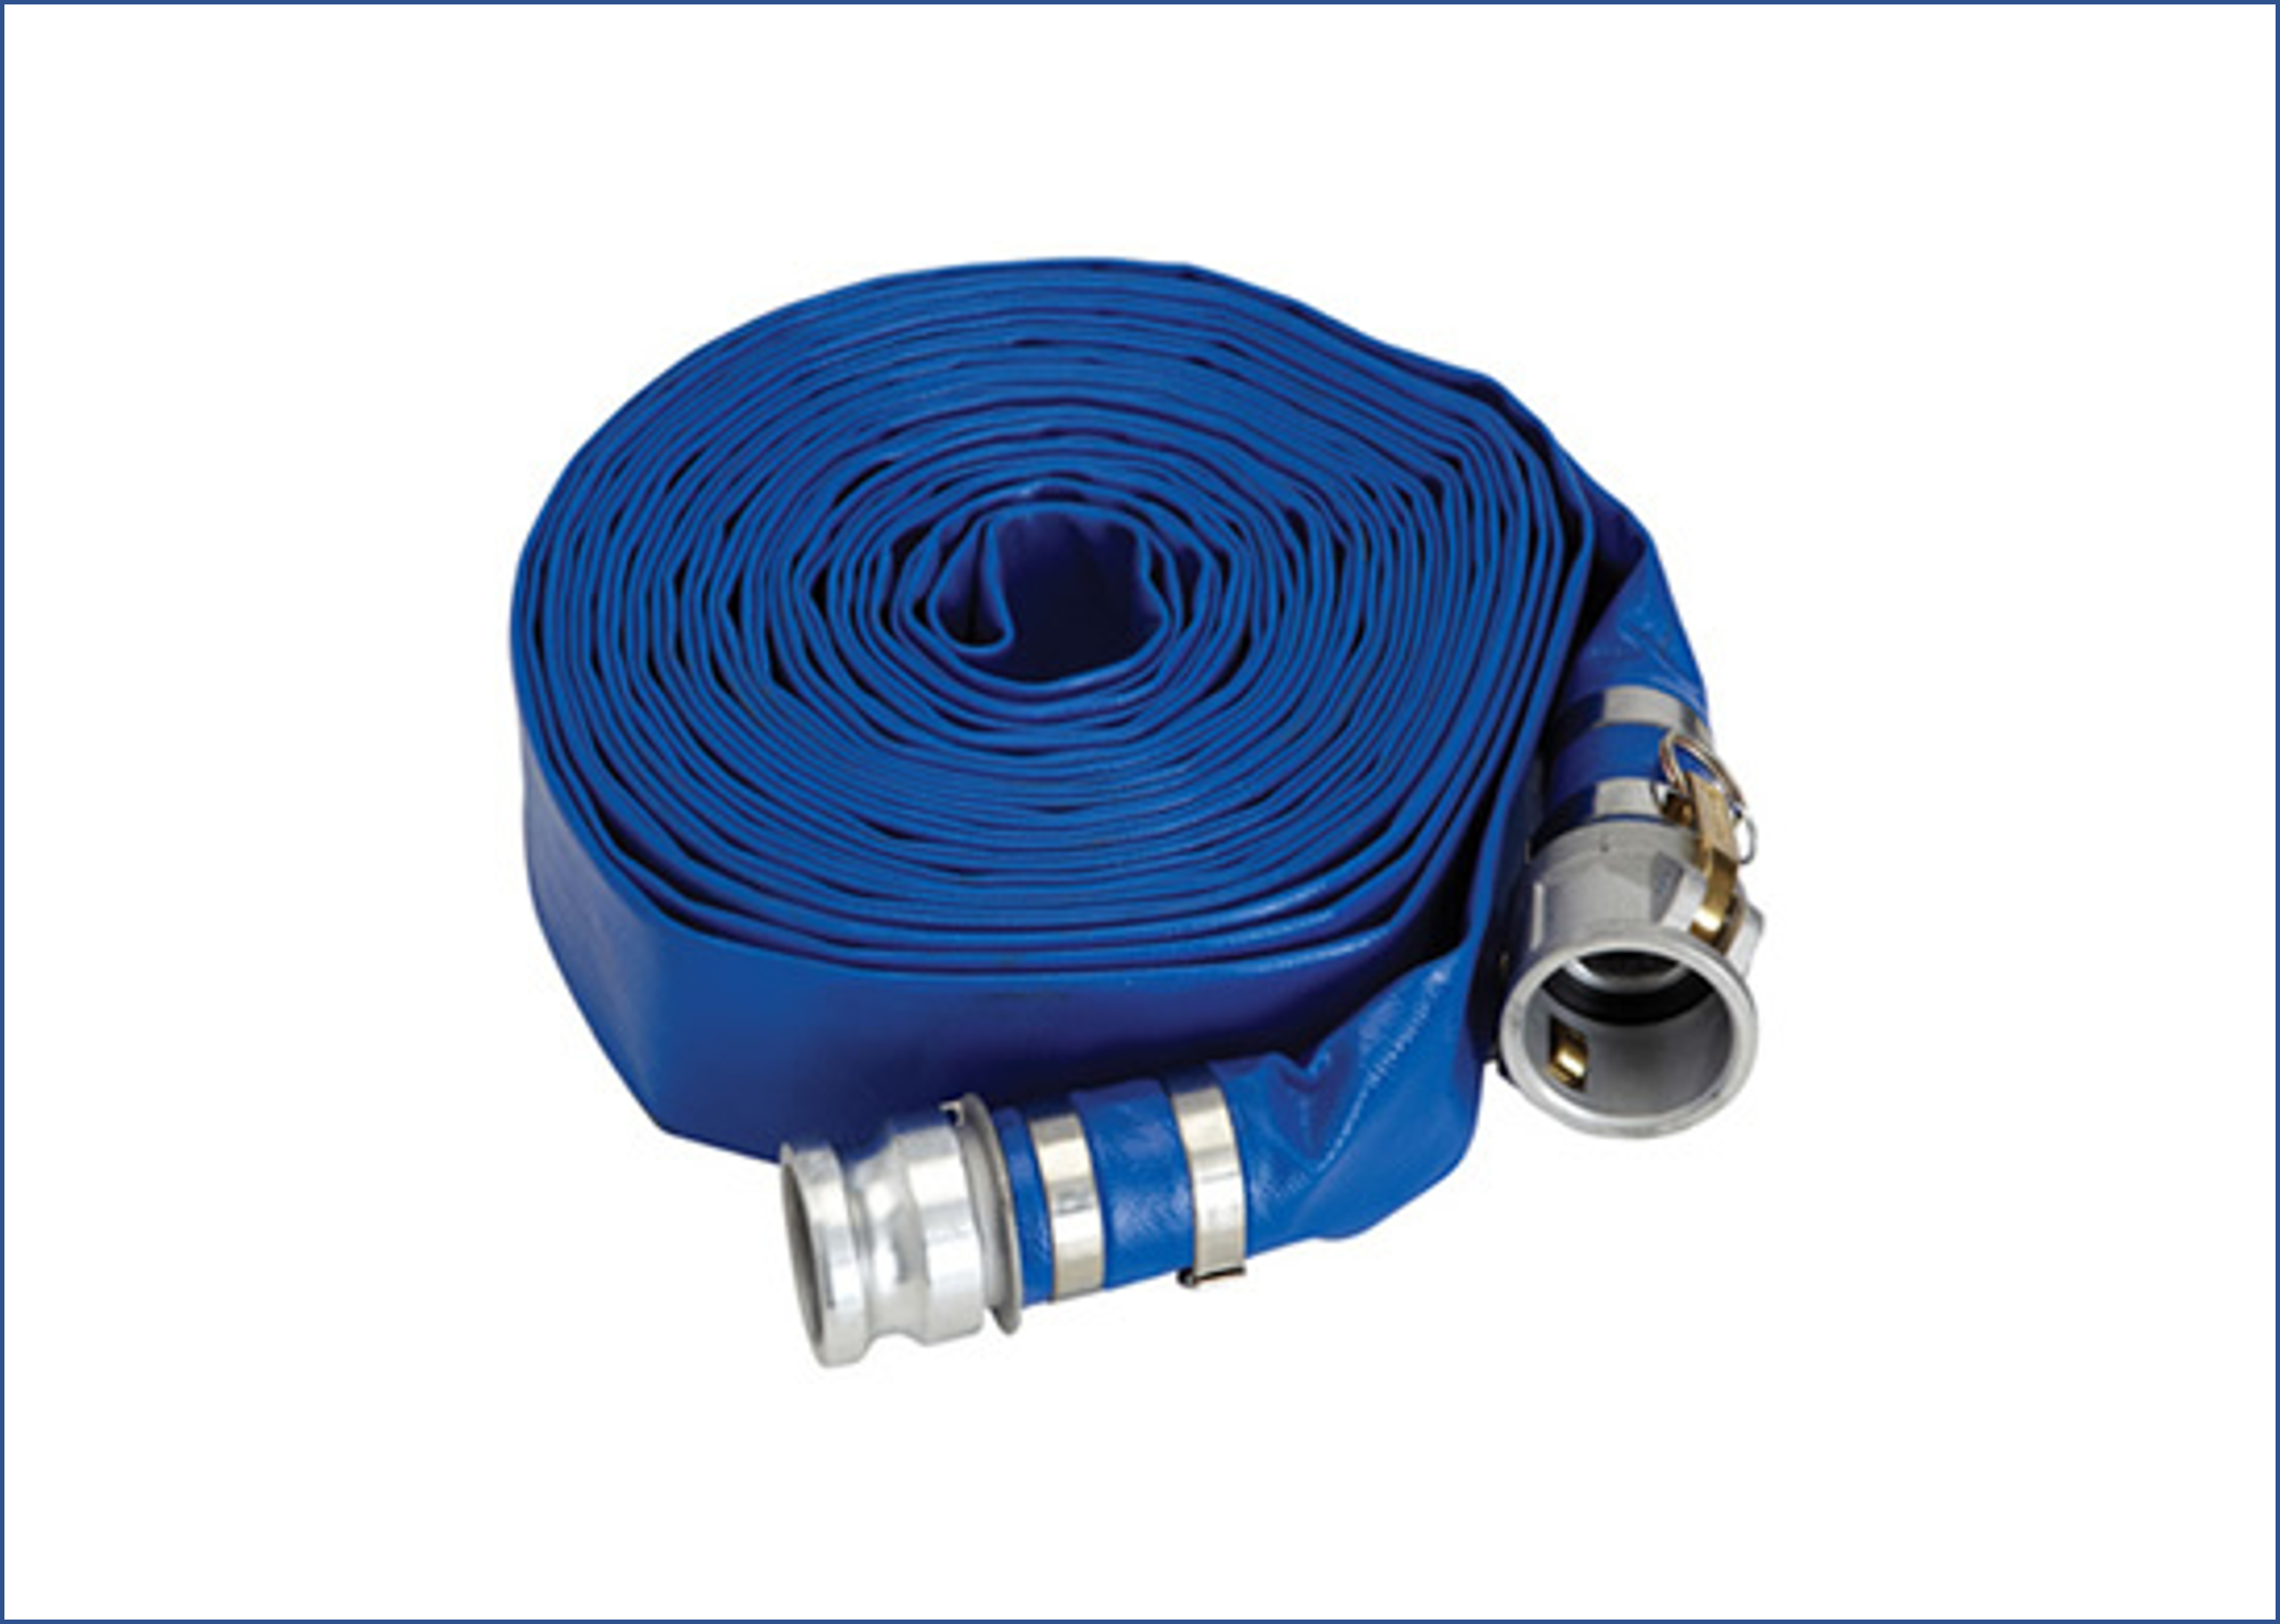 50mm/2inch - Lay-flat delivery hose - 20m